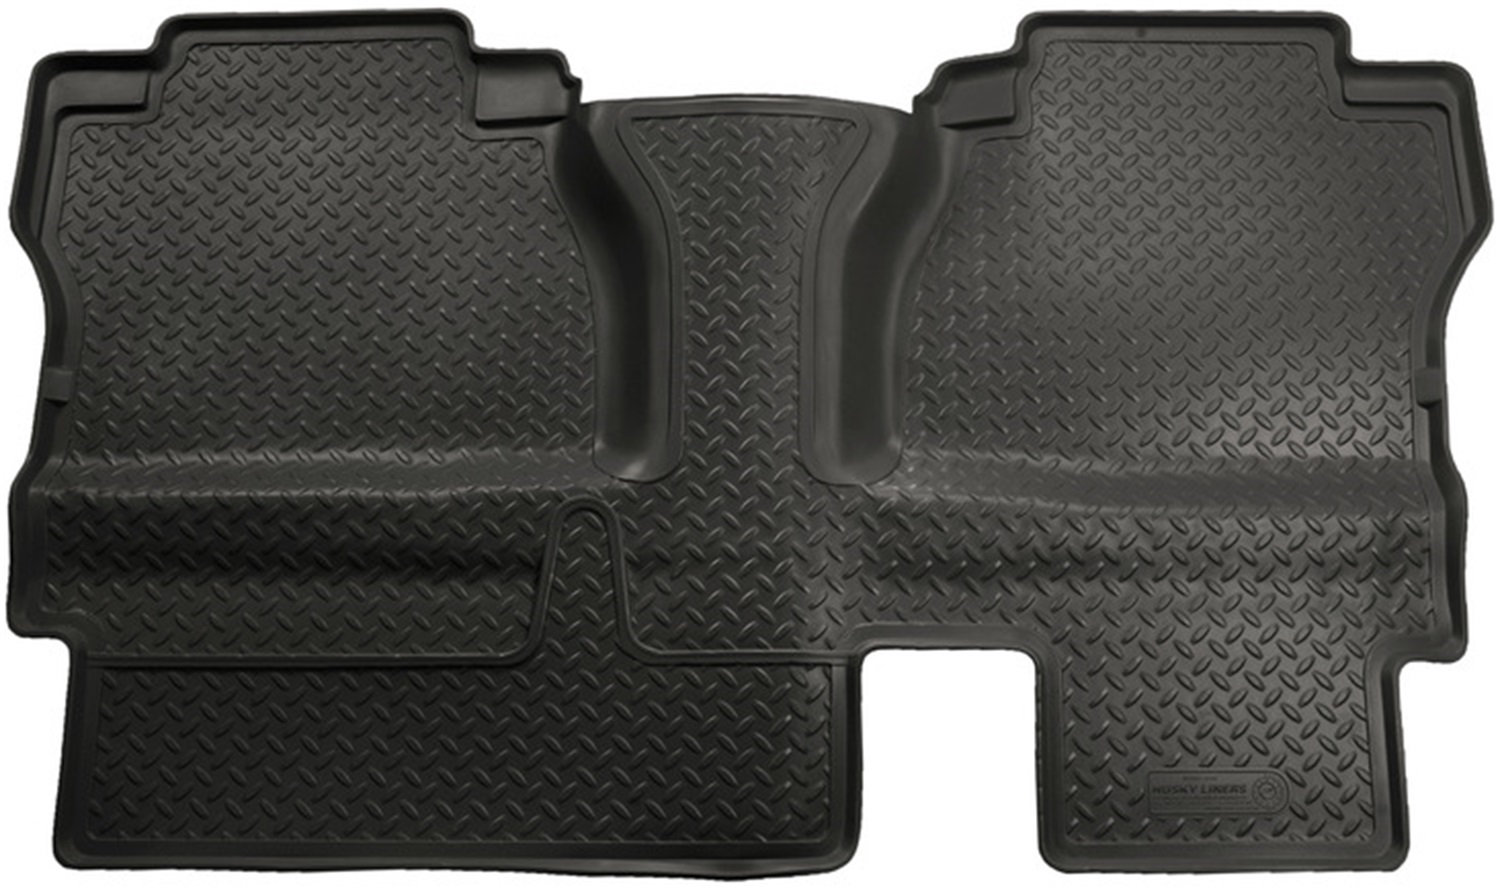 Husky Liners Husky Liners 65581 Classic Style; Floor Liner Fits 07-13 Tundra